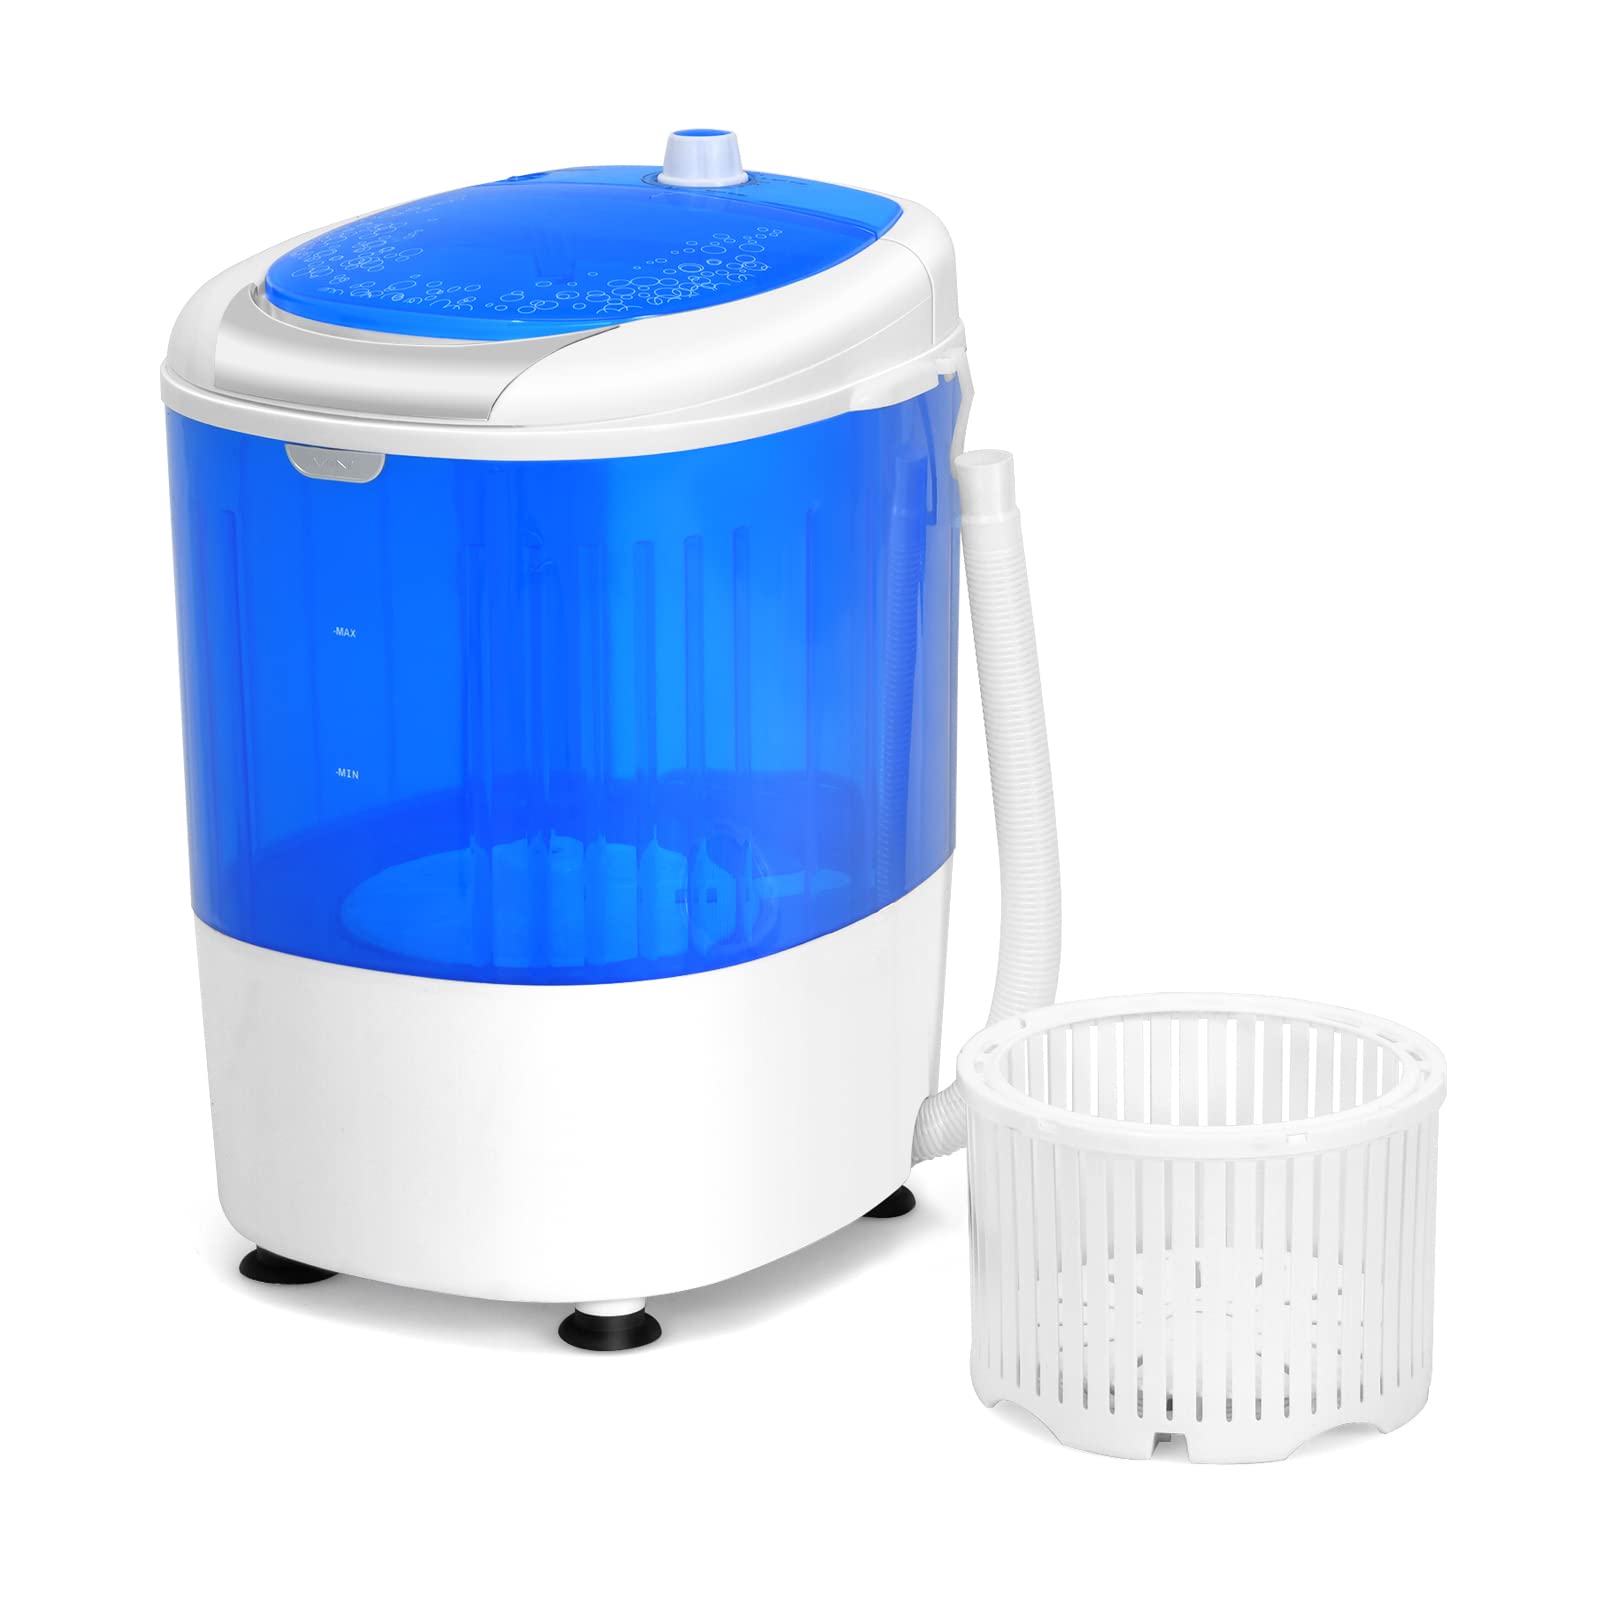  Panda Portable Washing Machine 10 LBS Capacity, Fully Automatic  1.34 Cu.ft. Top Load Portable Washer with Built-in Drain Pump, Compact  Laundry Washer for Apartment and Household : Appliances